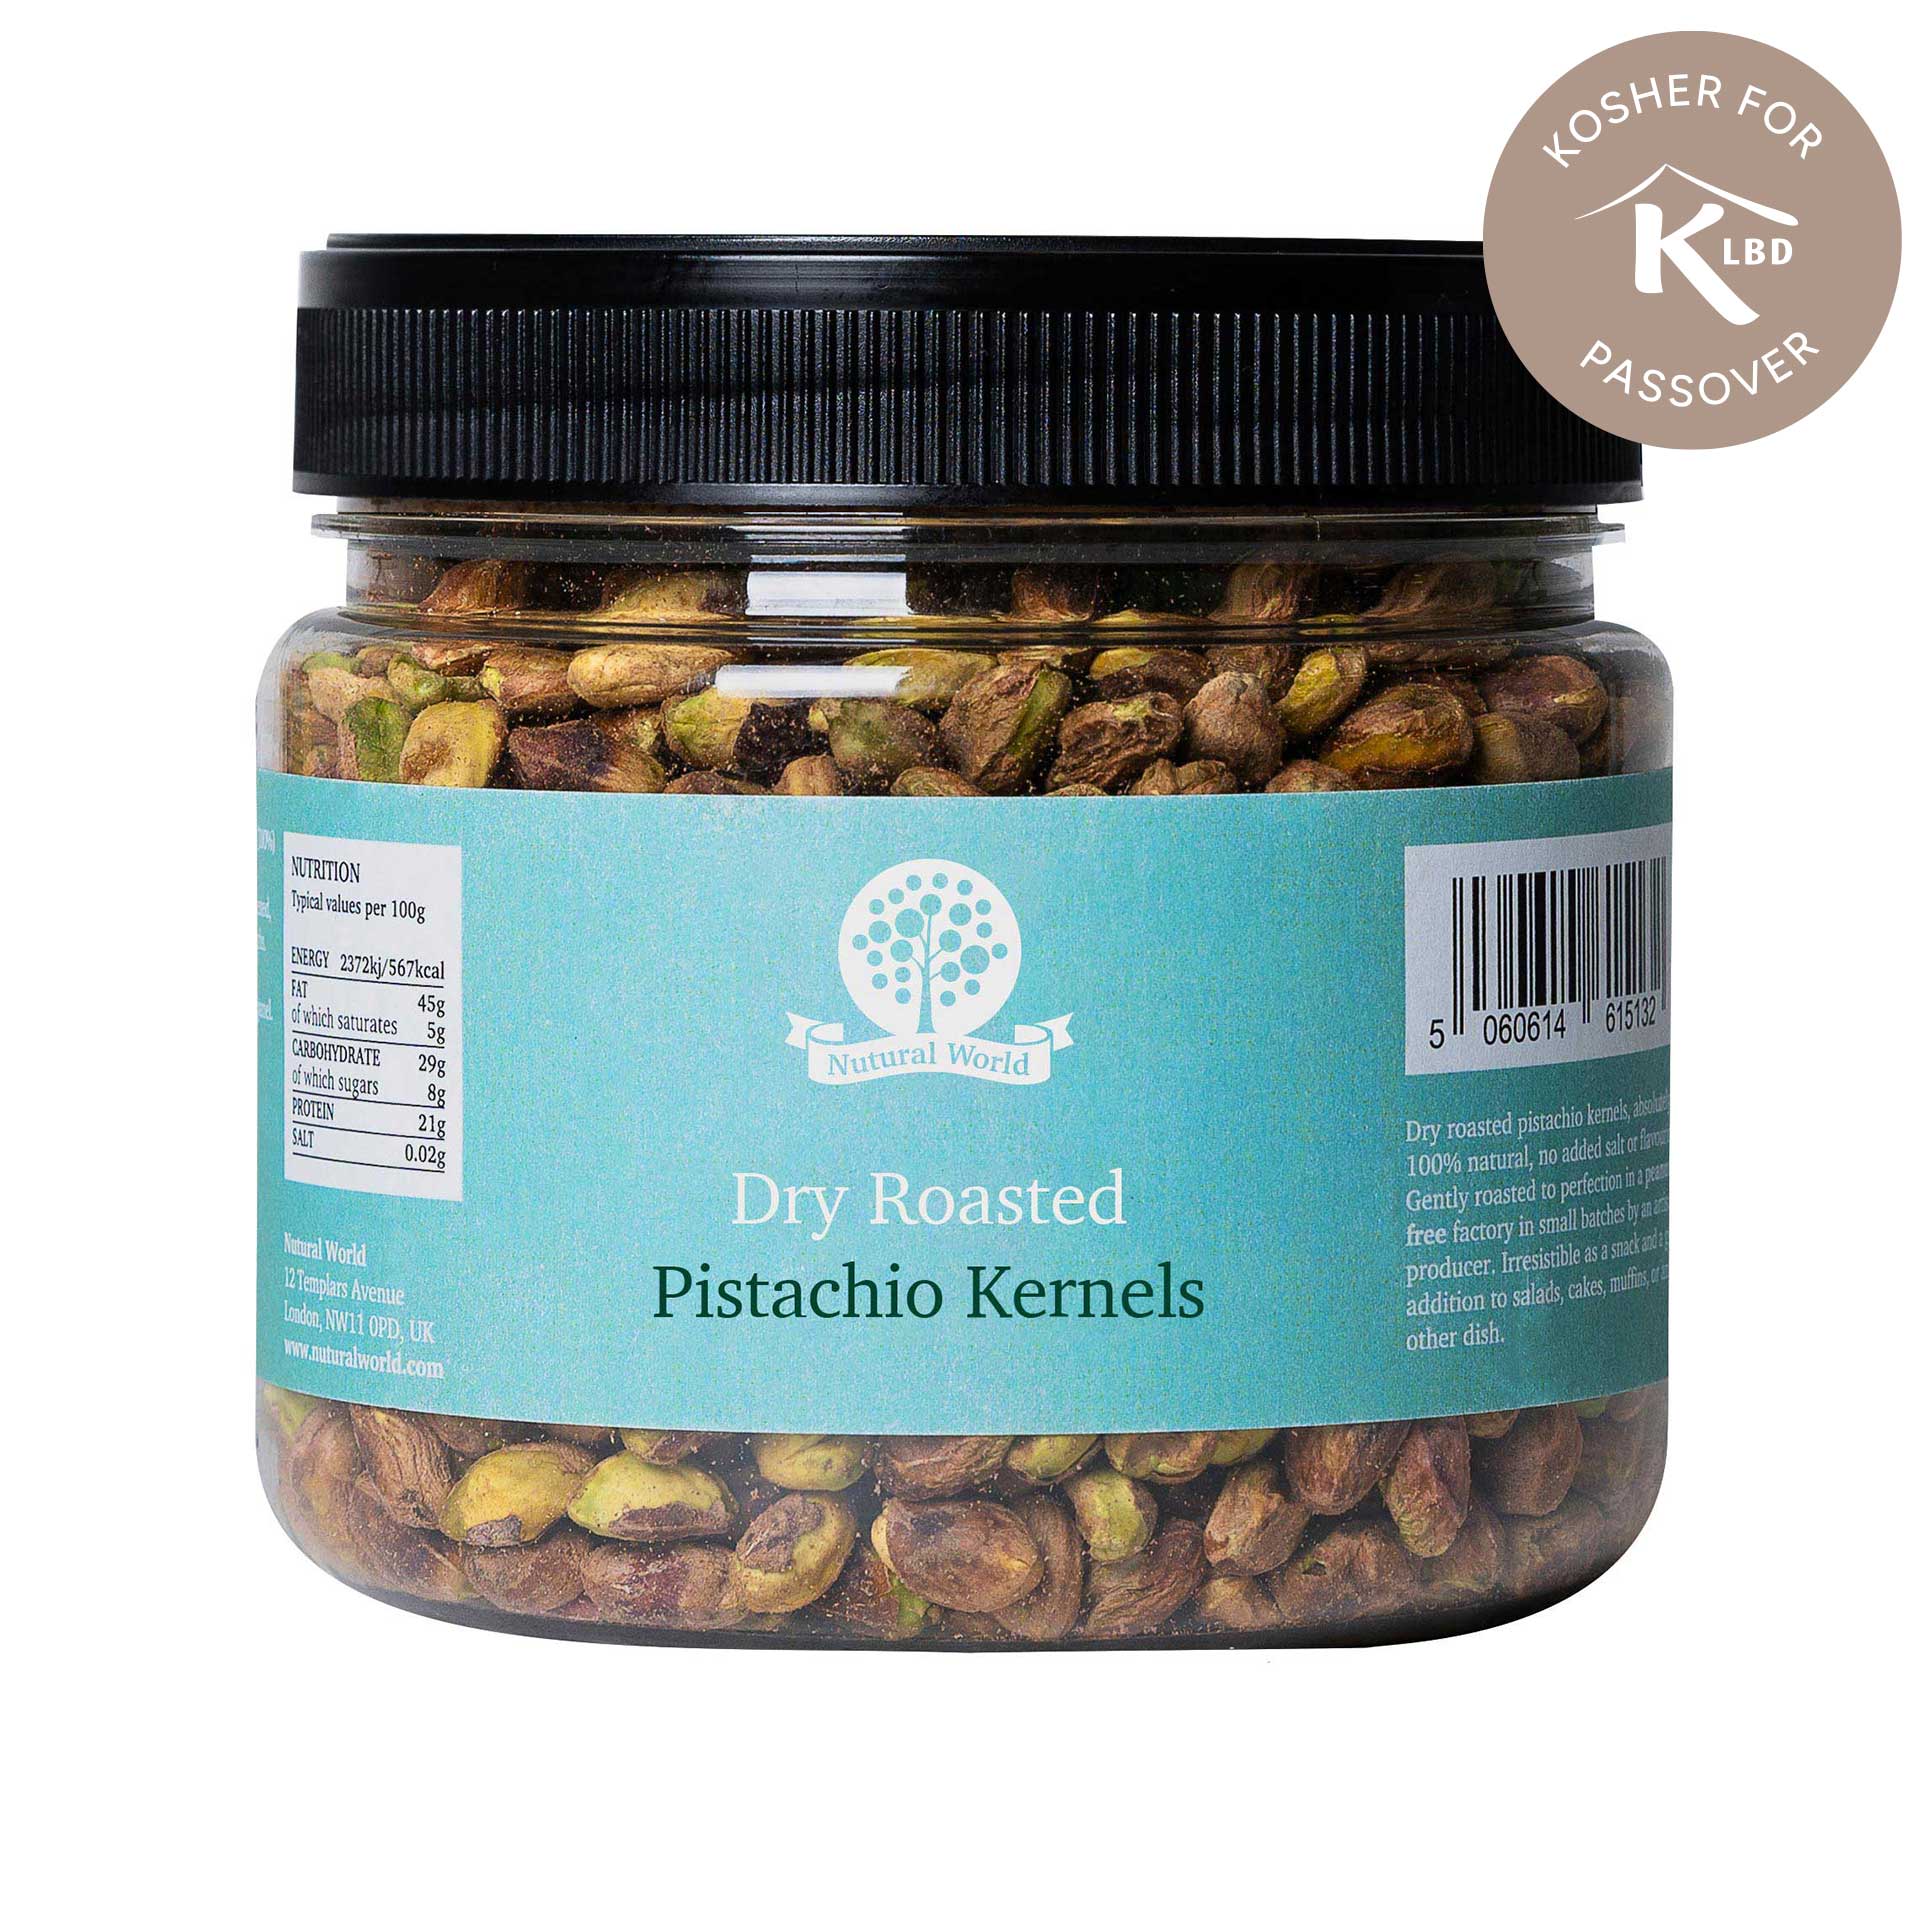 Dry Roasted Pistachio Kernels - Unsalted (500g) - Kosher for Passover